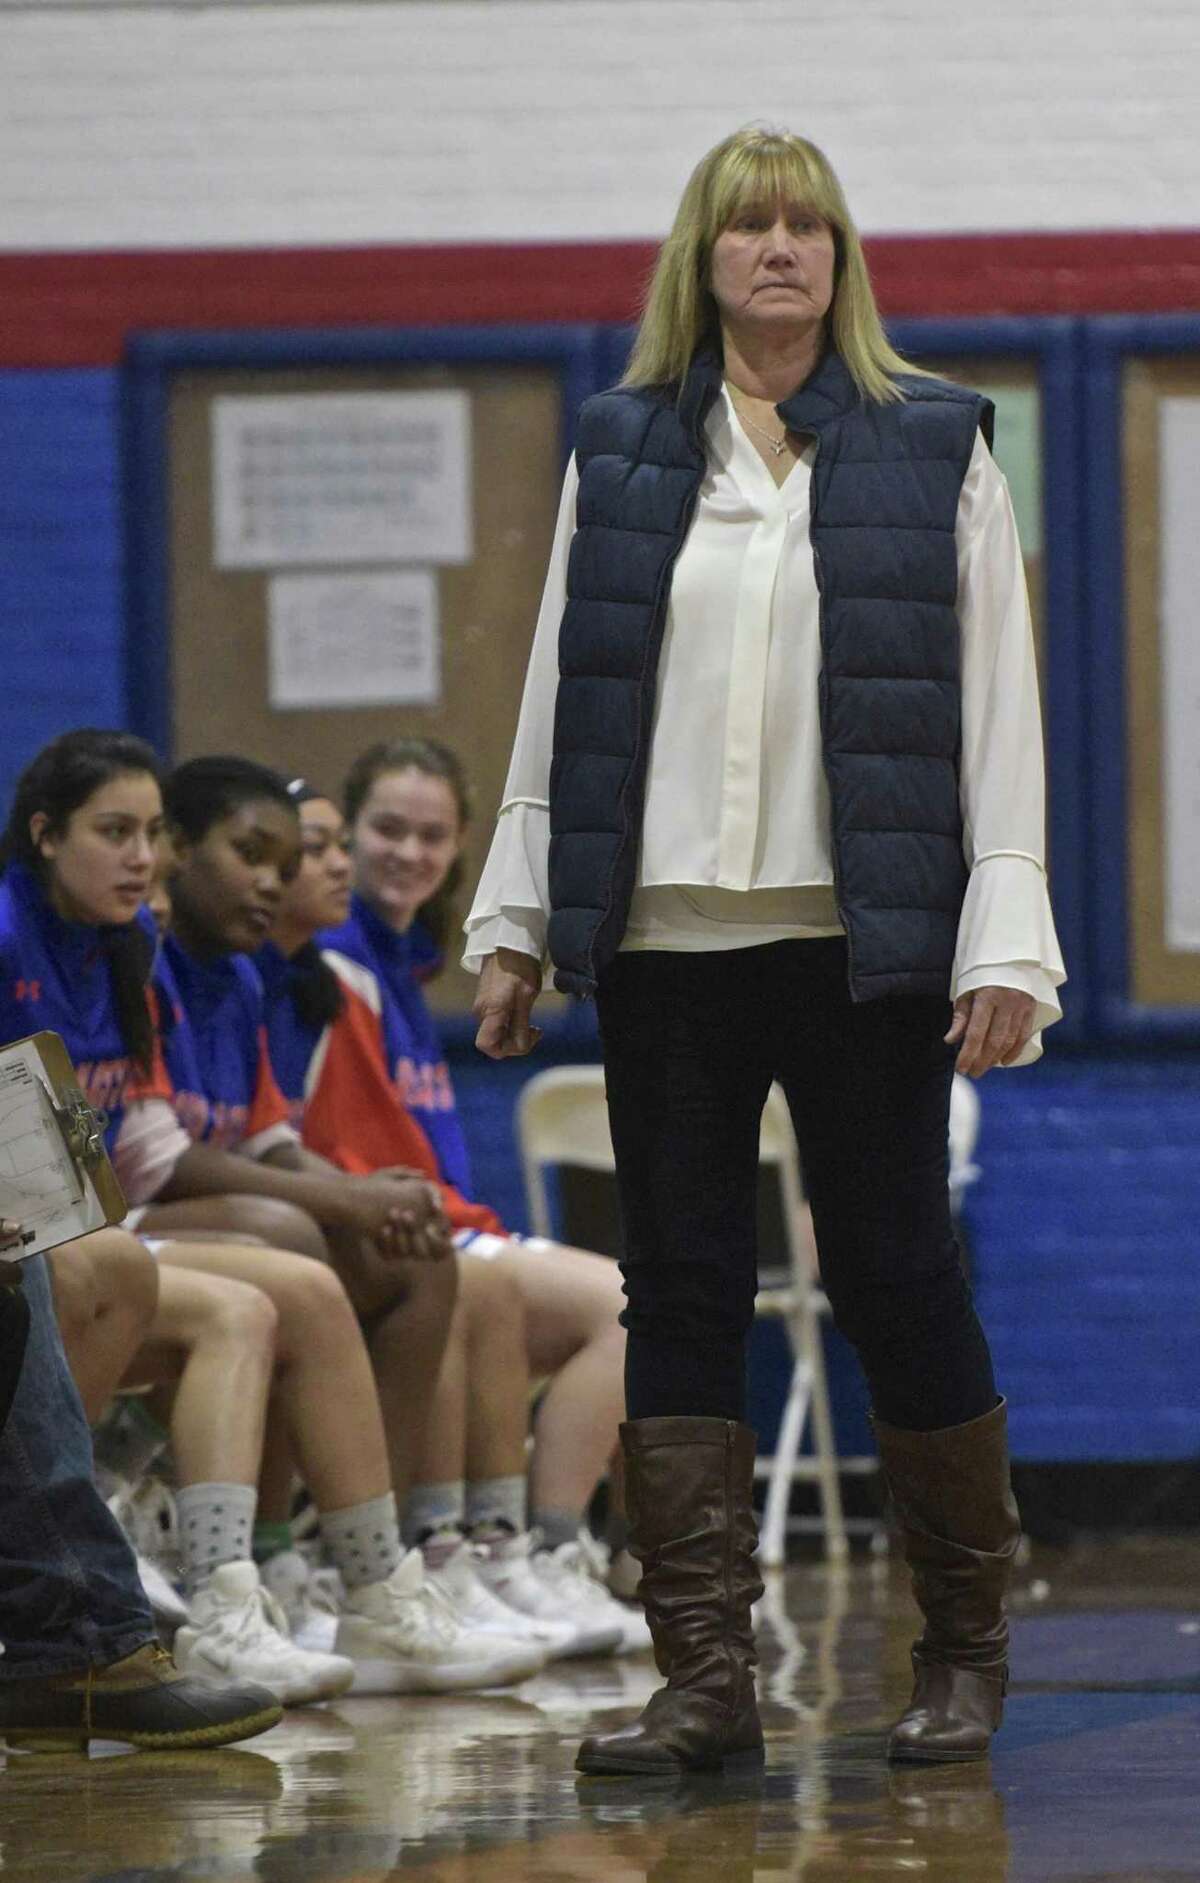 Danbury head coach Jackie DiNardo watches her team during the championship game of the 13th Annual The News-Times Greater Danbury Holiday Festival girls high school basketball tournament. Thursday, December 28, 2017, at the Danbury War Memorial, in Danbury, Conn